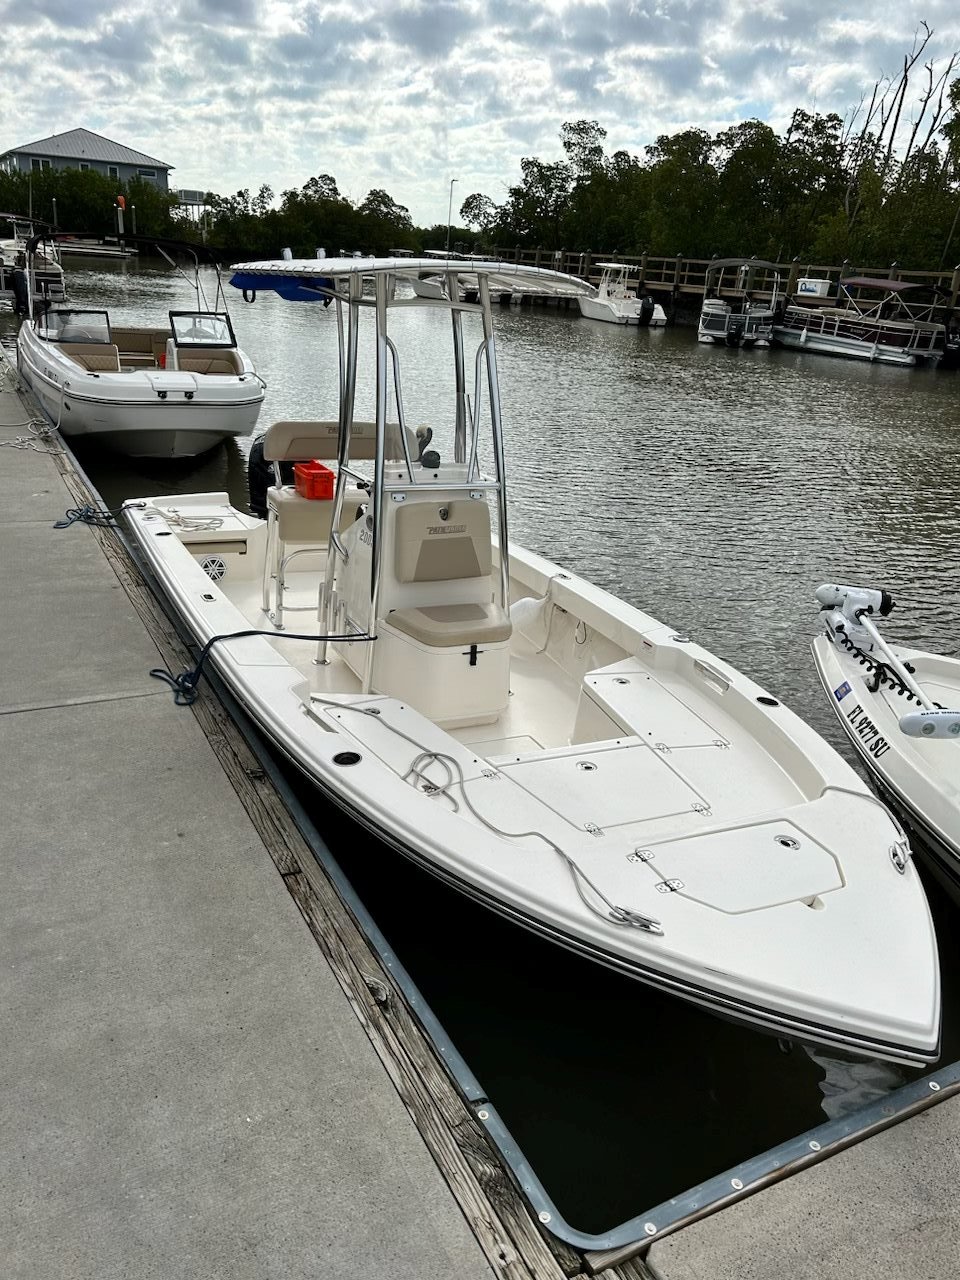 PEARL JAM (21FT Center Console Pathfinder 150 HP Fishing